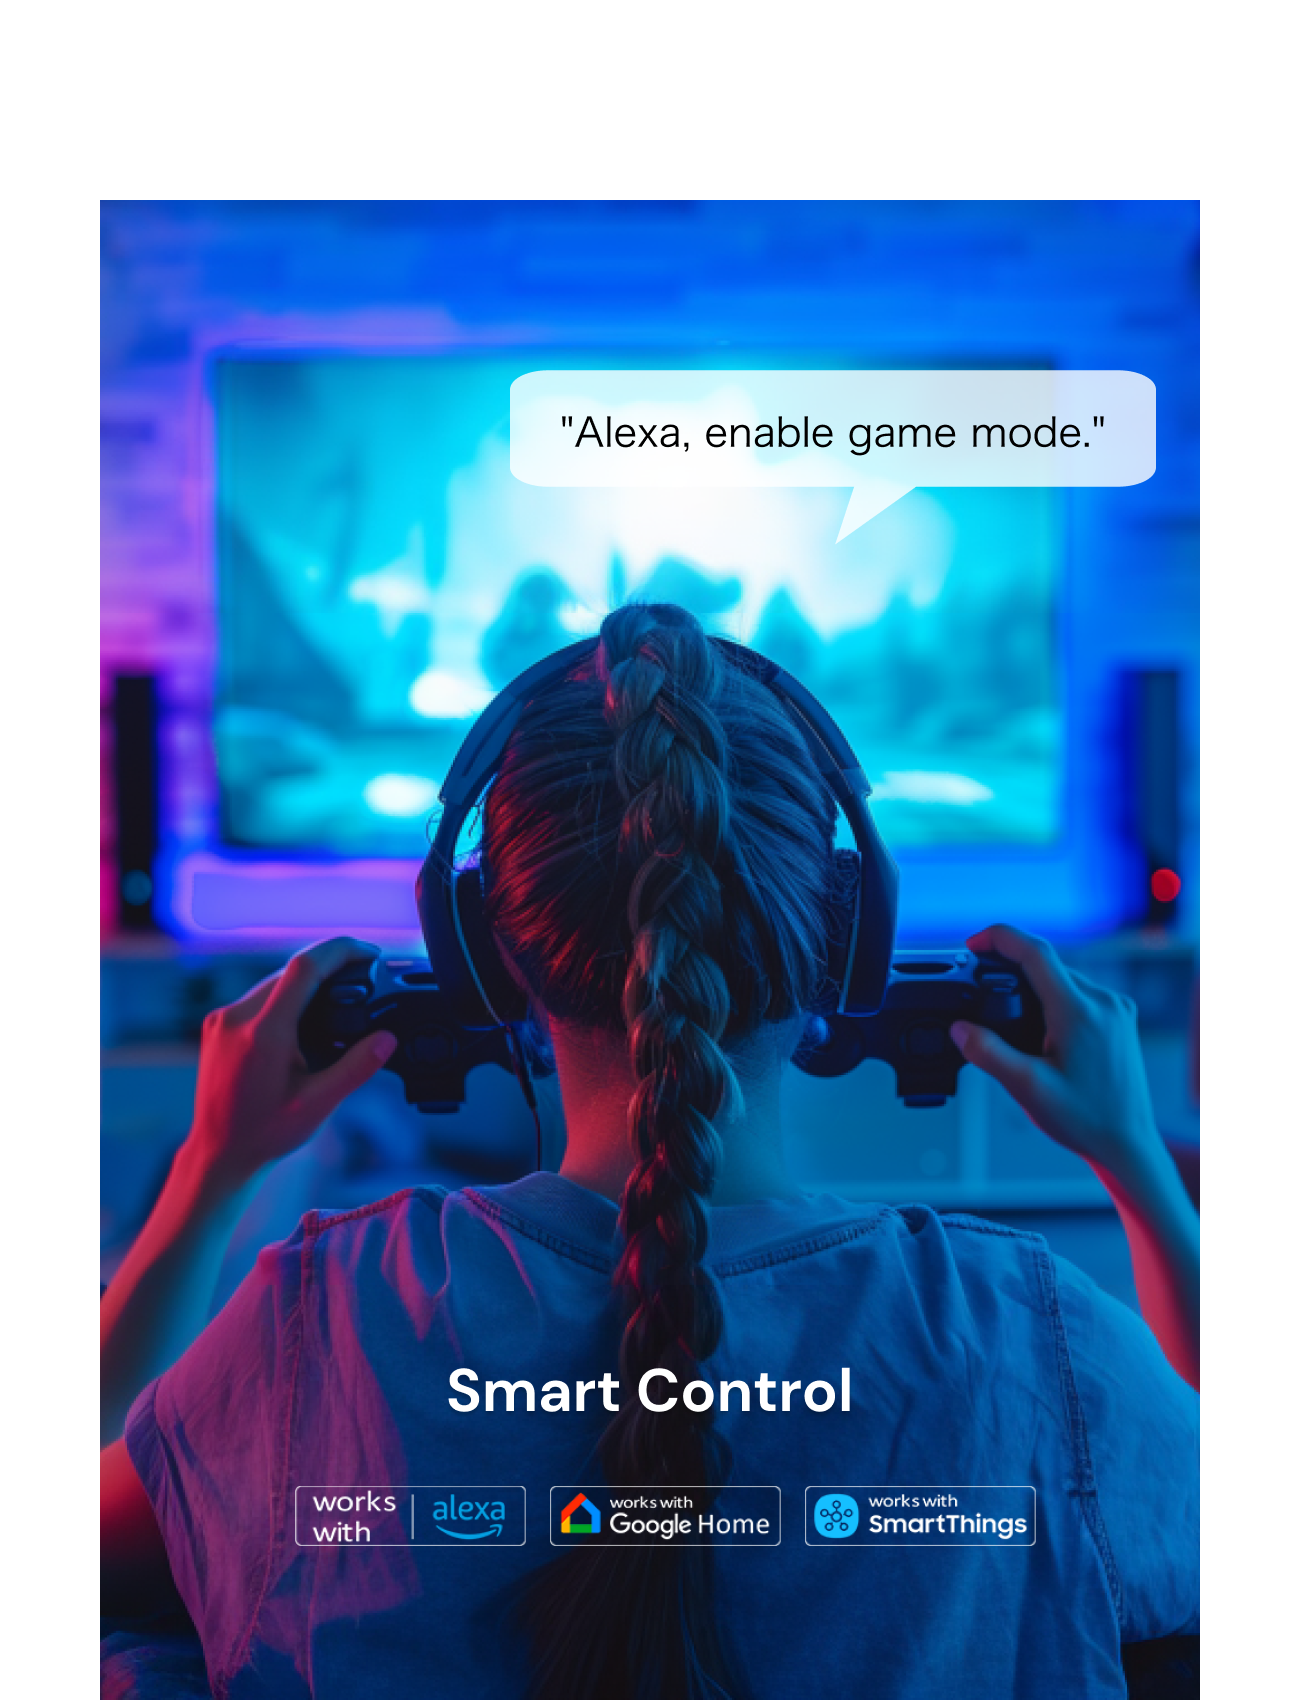 Hands-Free Voice Control: Compatible with Alexa, Google Assistant and SmartThings to control Wi-Fi LED strip lights, Power on/off, adjust brightness, or change colors, free up your hands and create the ambiance needed for a party.